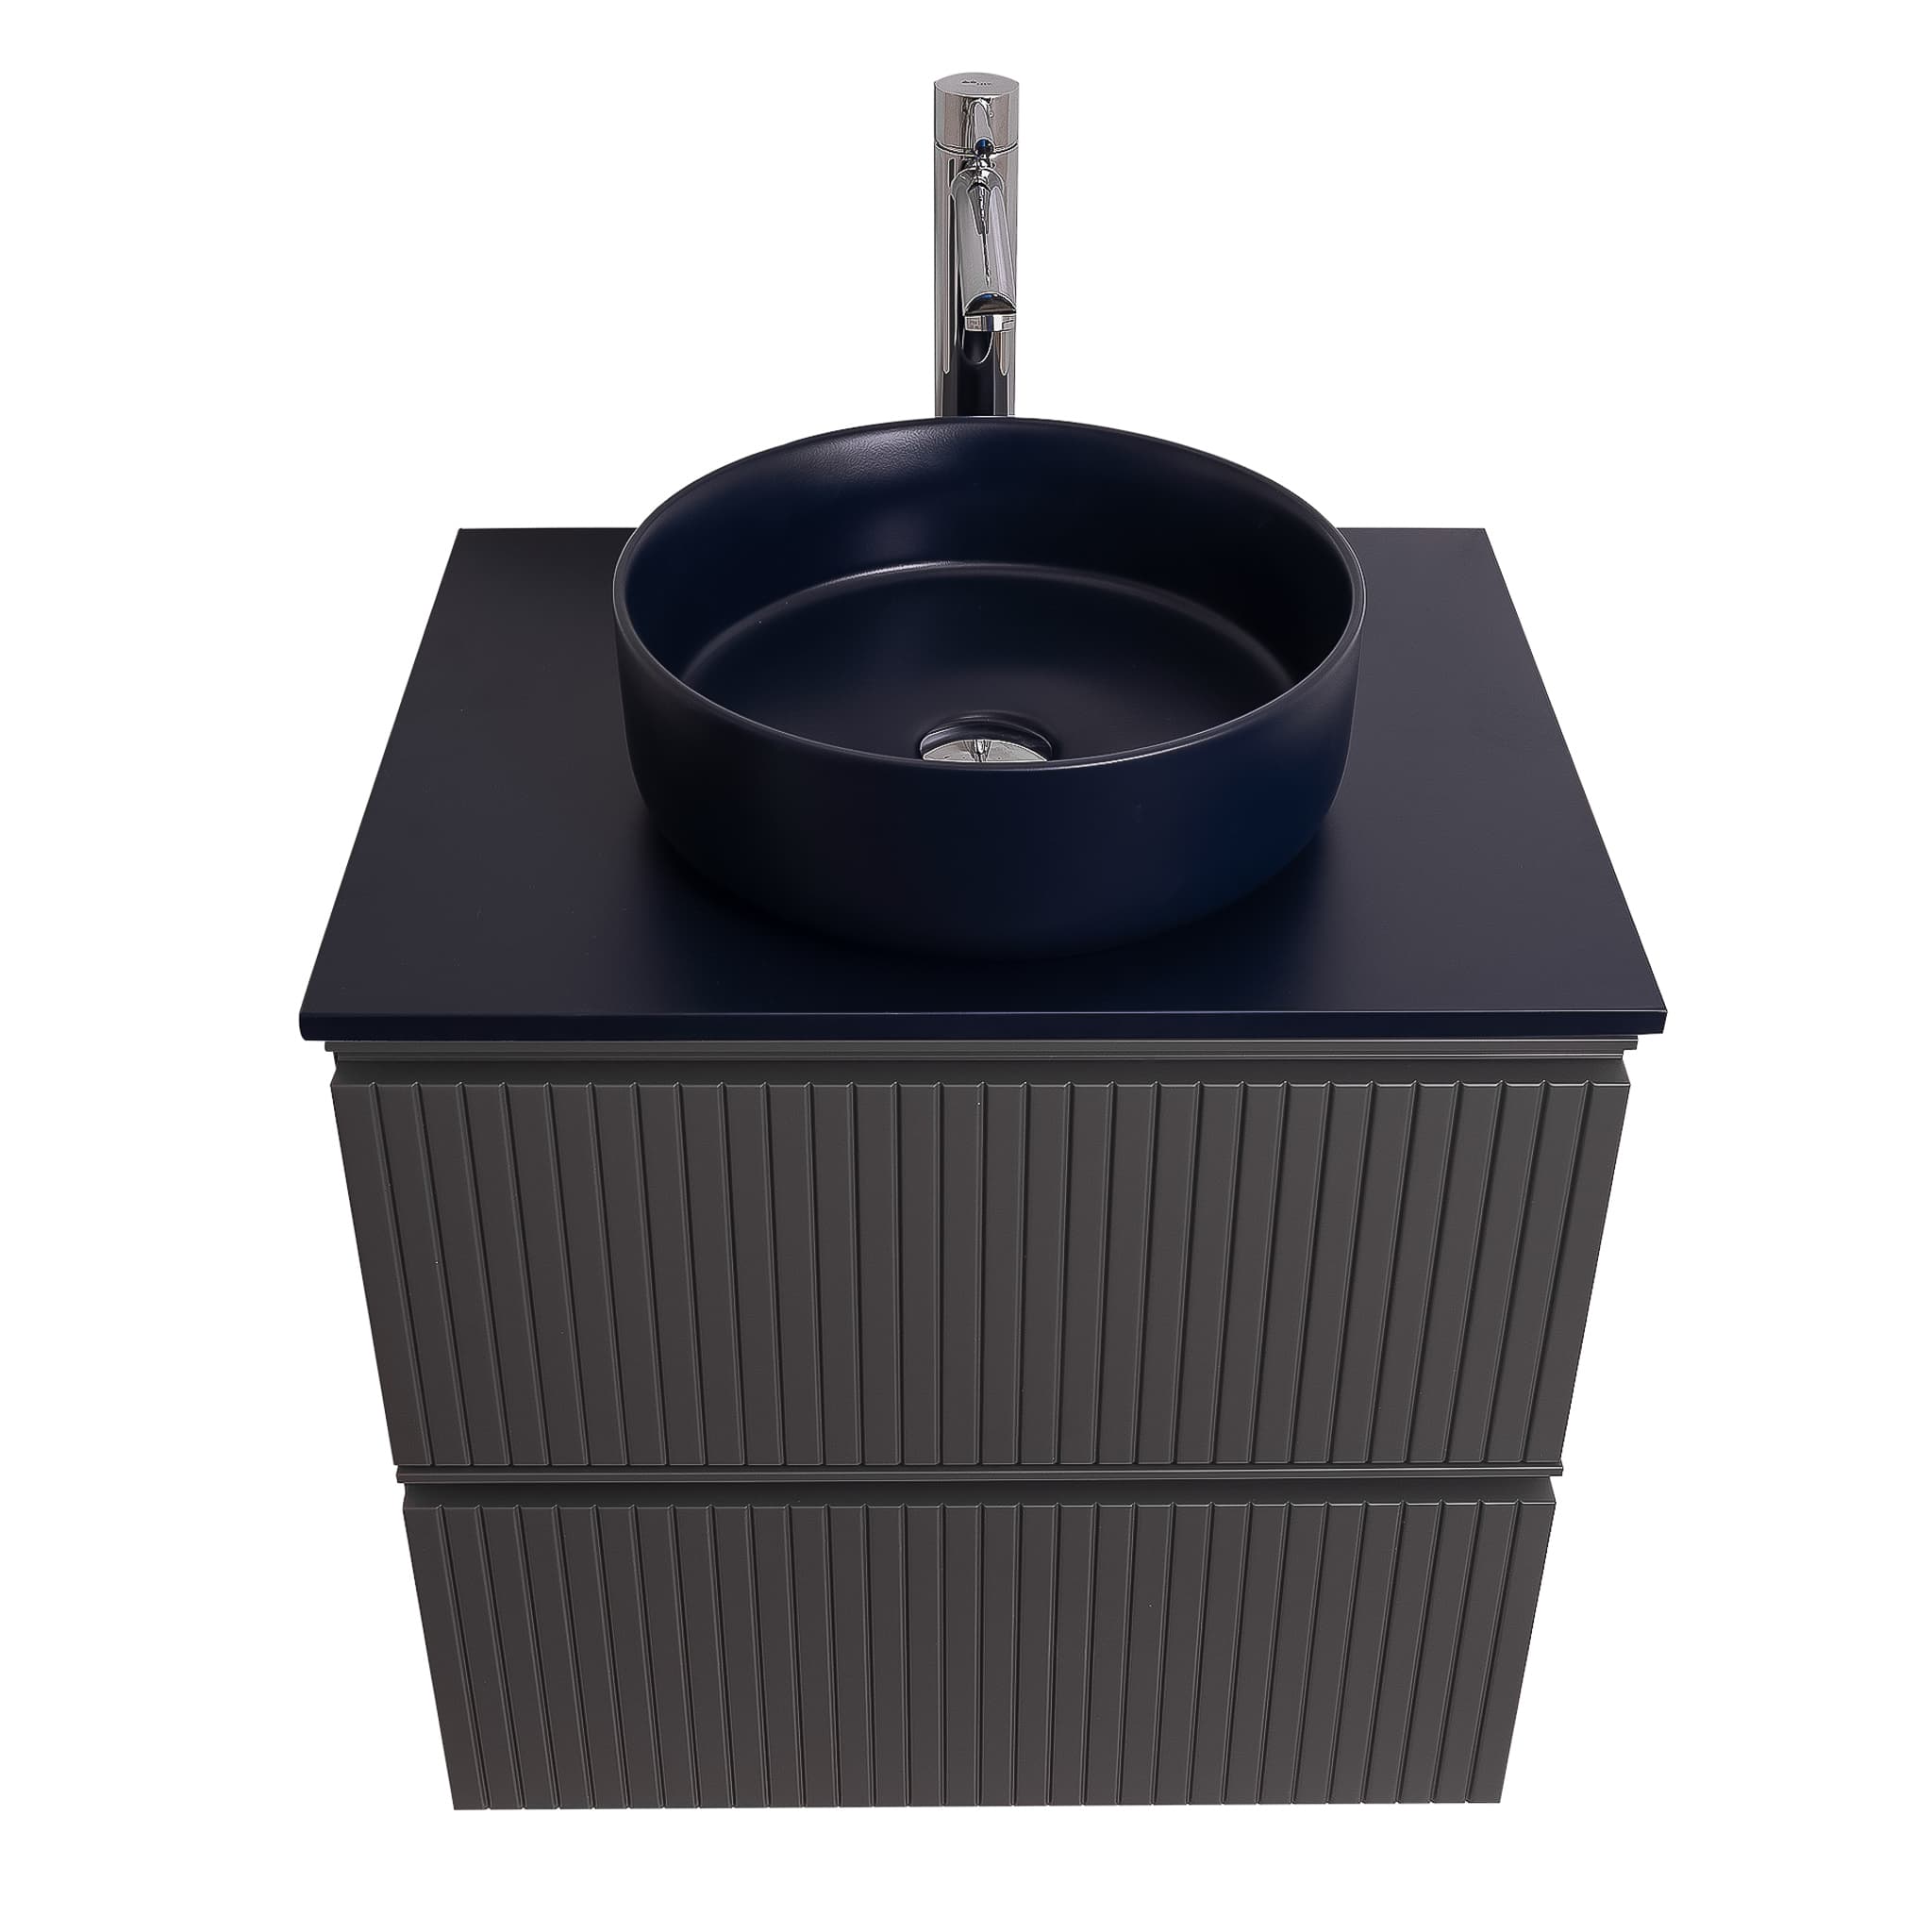 Ares 23.5 Matte Grey Cabinet, Ares Navy Blue Top And Ares Navy Blue Ceramic Basin, Wall Mounted Modern Vanity Set